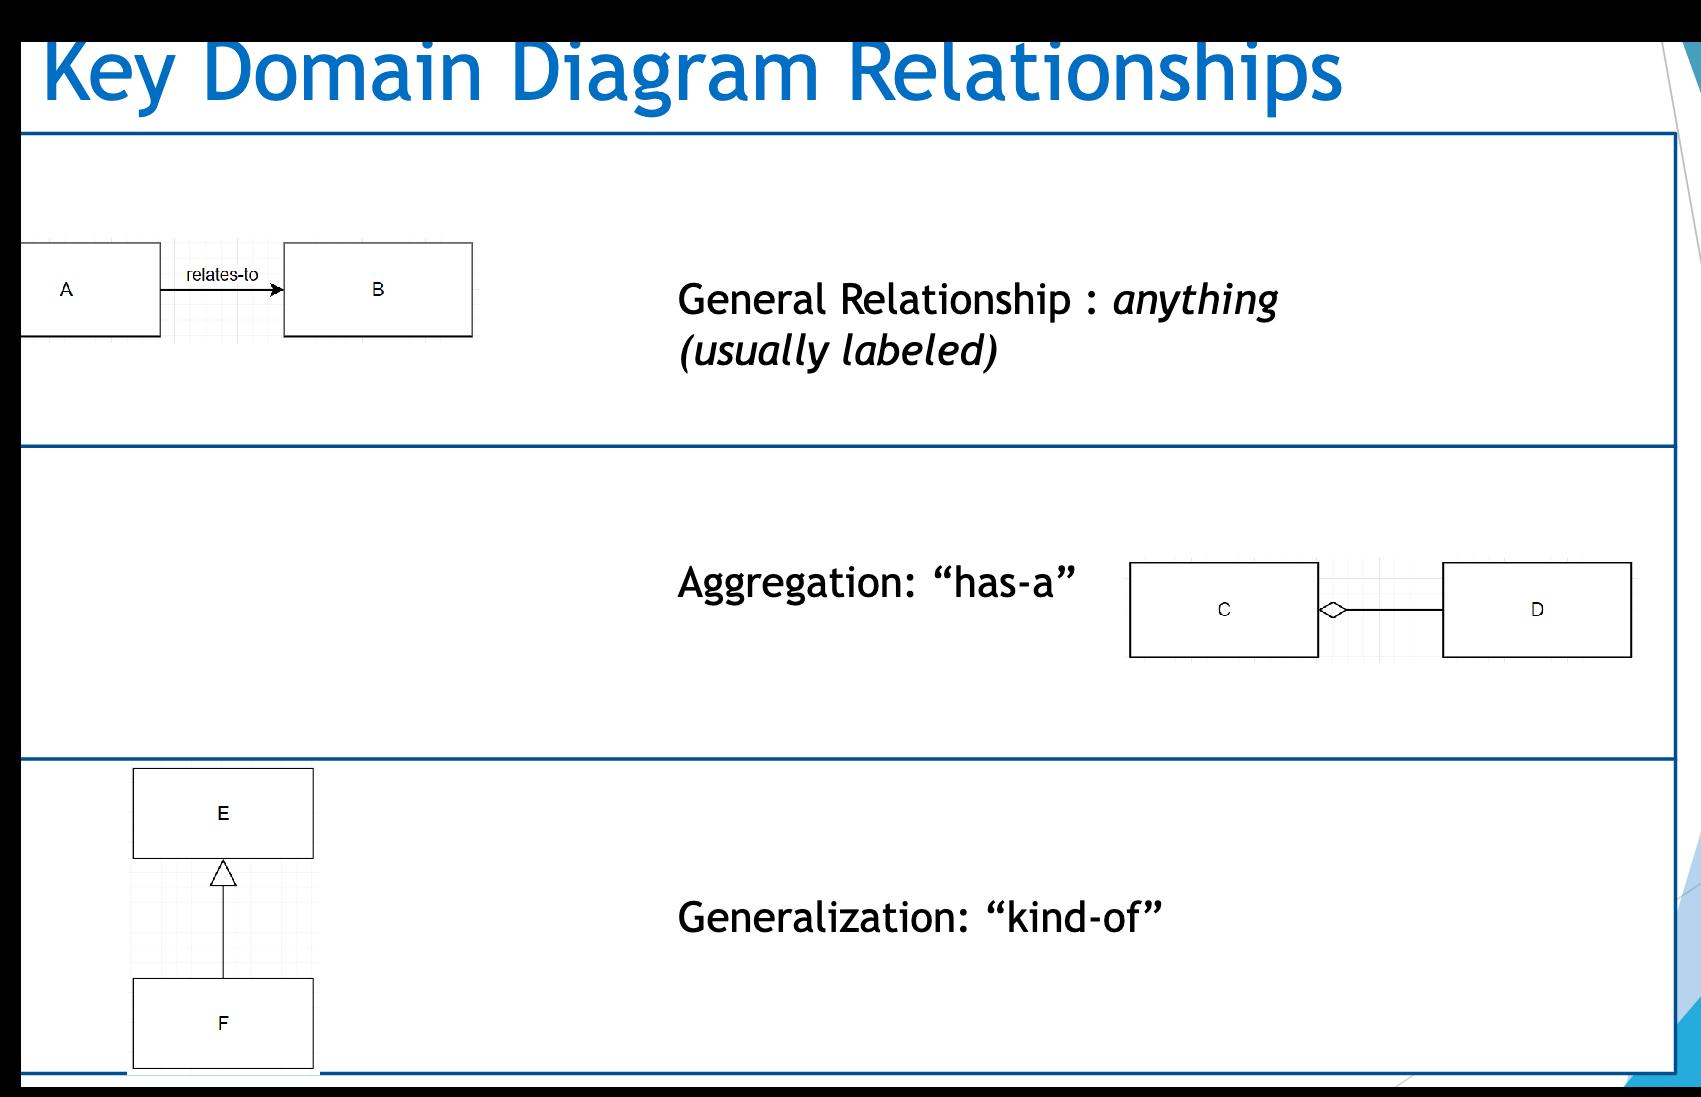 Key Domain Diagram Relationships A relates-to E F B General Relationship : anything (usually labeled)